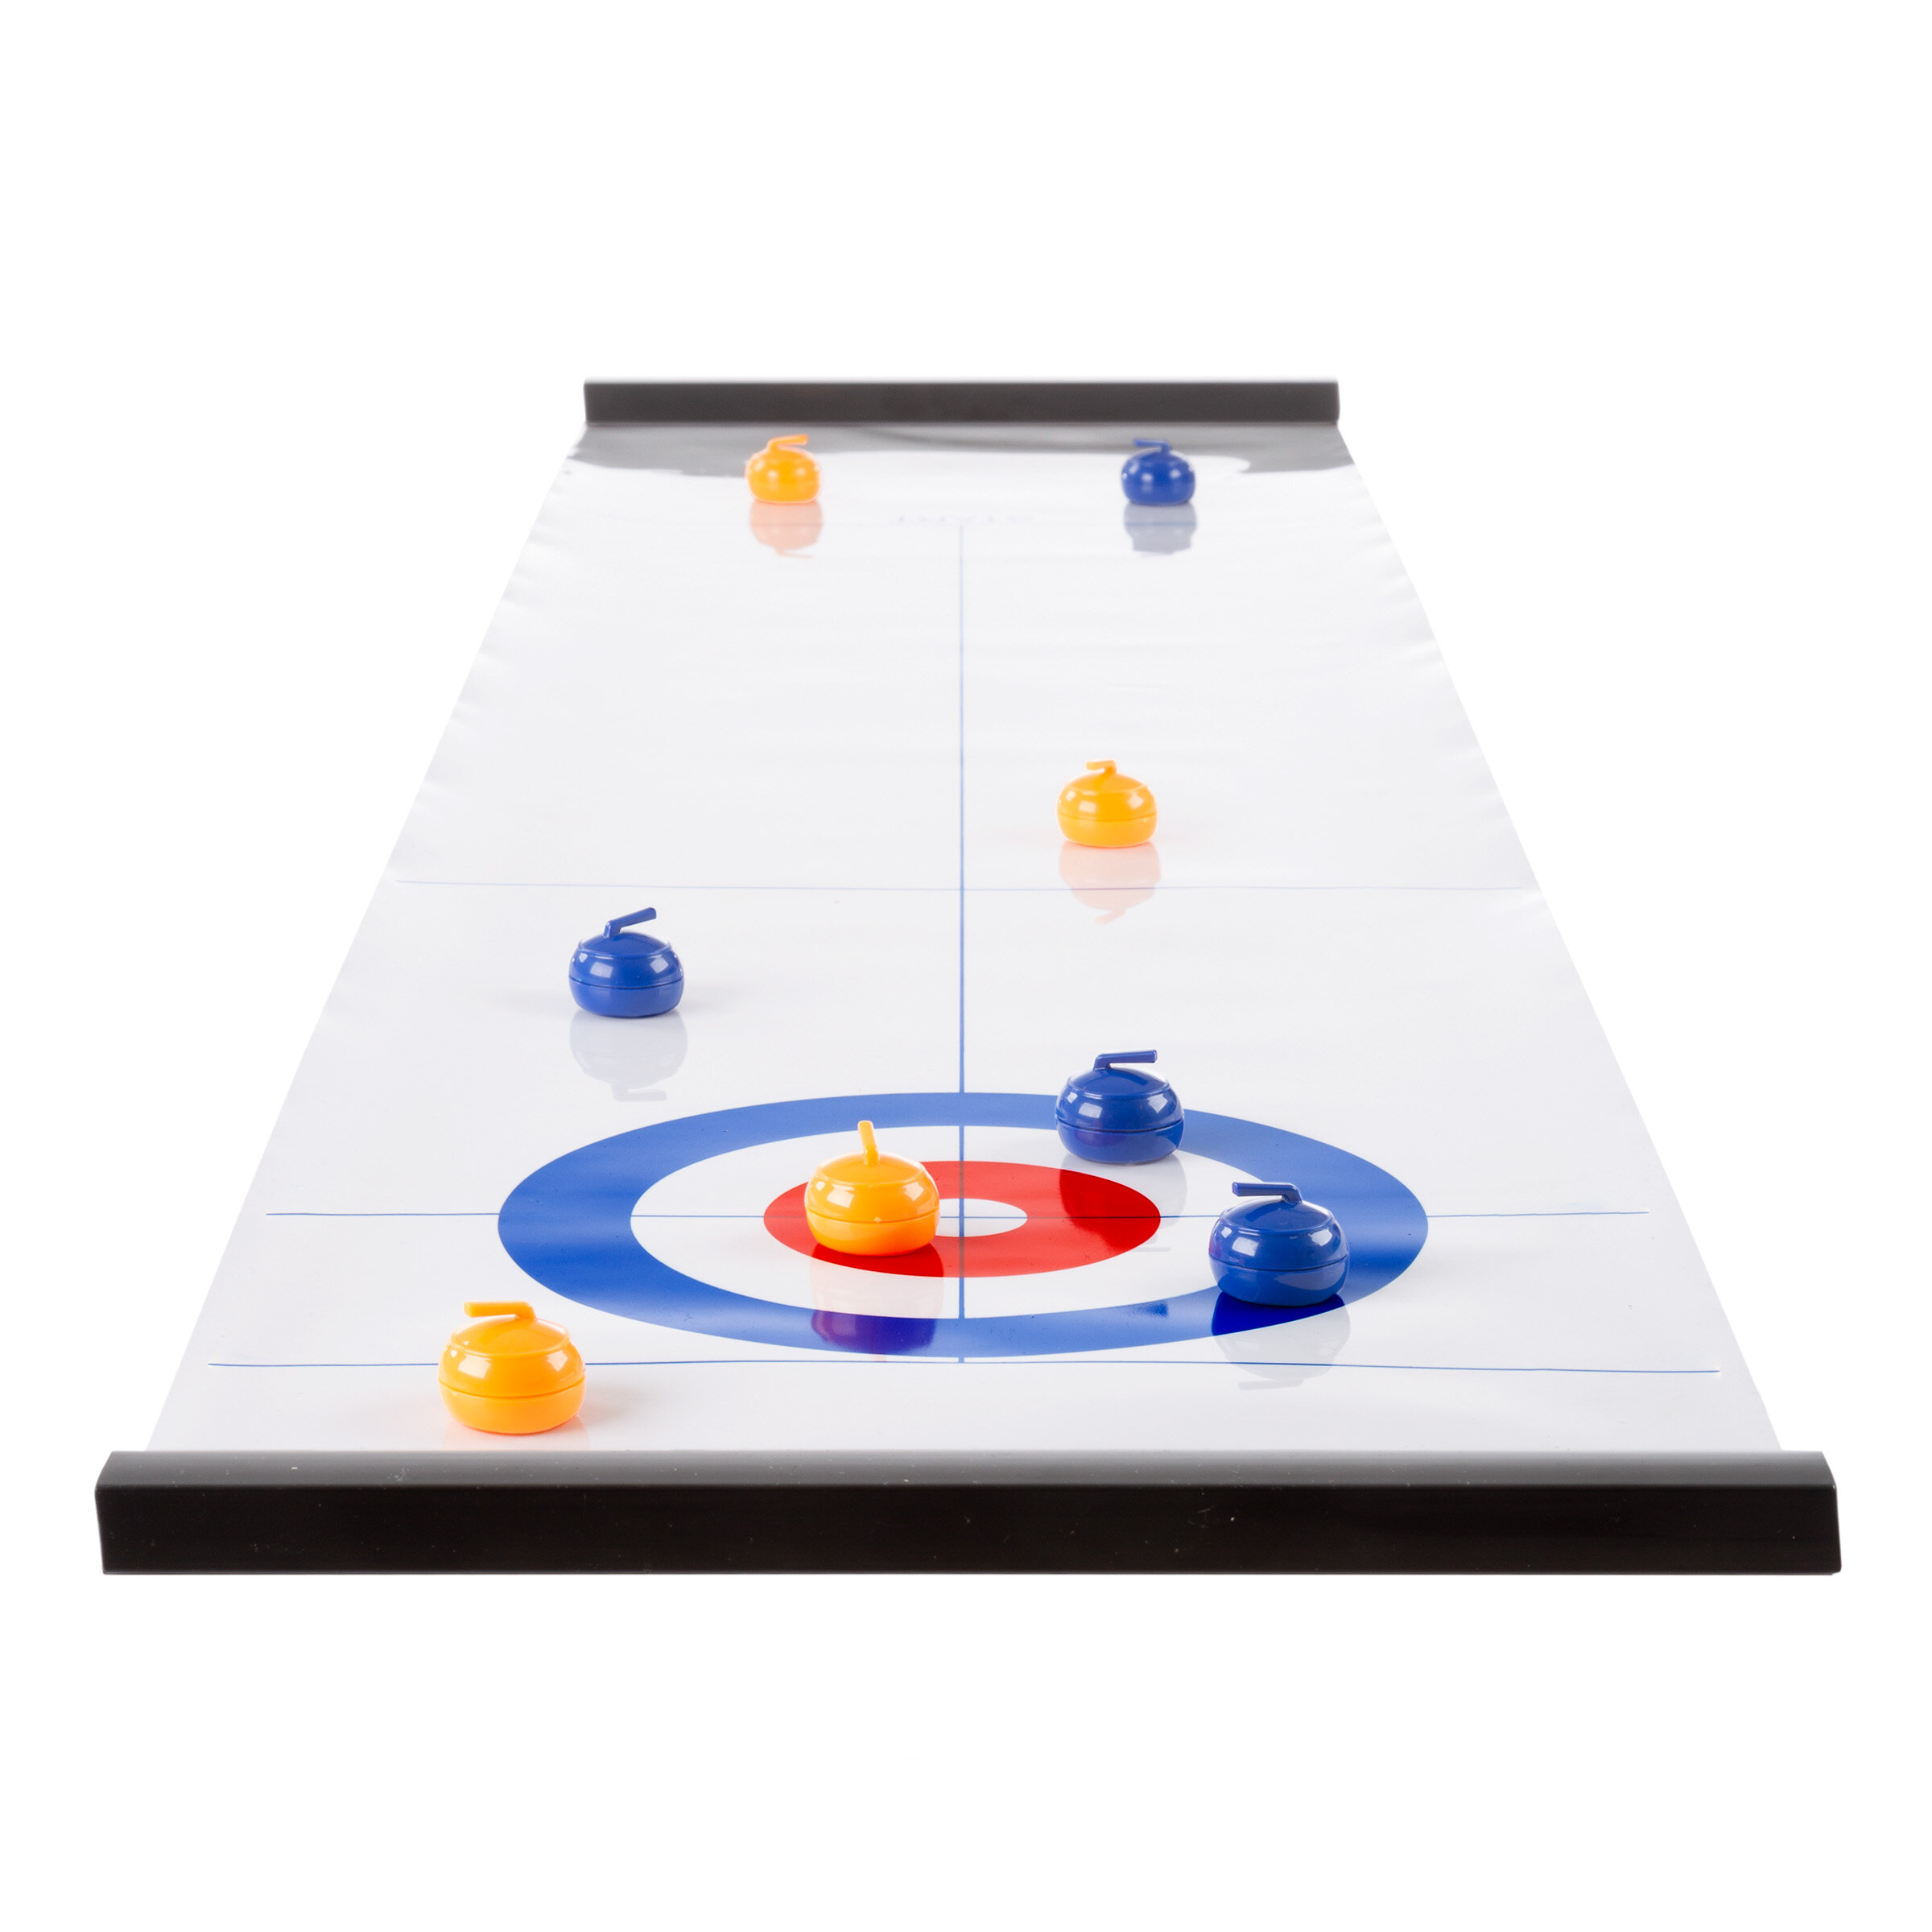 Adults & Family Come with 8+2 Tabletop Curling Stones Easy to Set Up Yobbi Tabletop Curling Game for Kids Fun Indoor Sports Game for Everyone Play & Portable. 